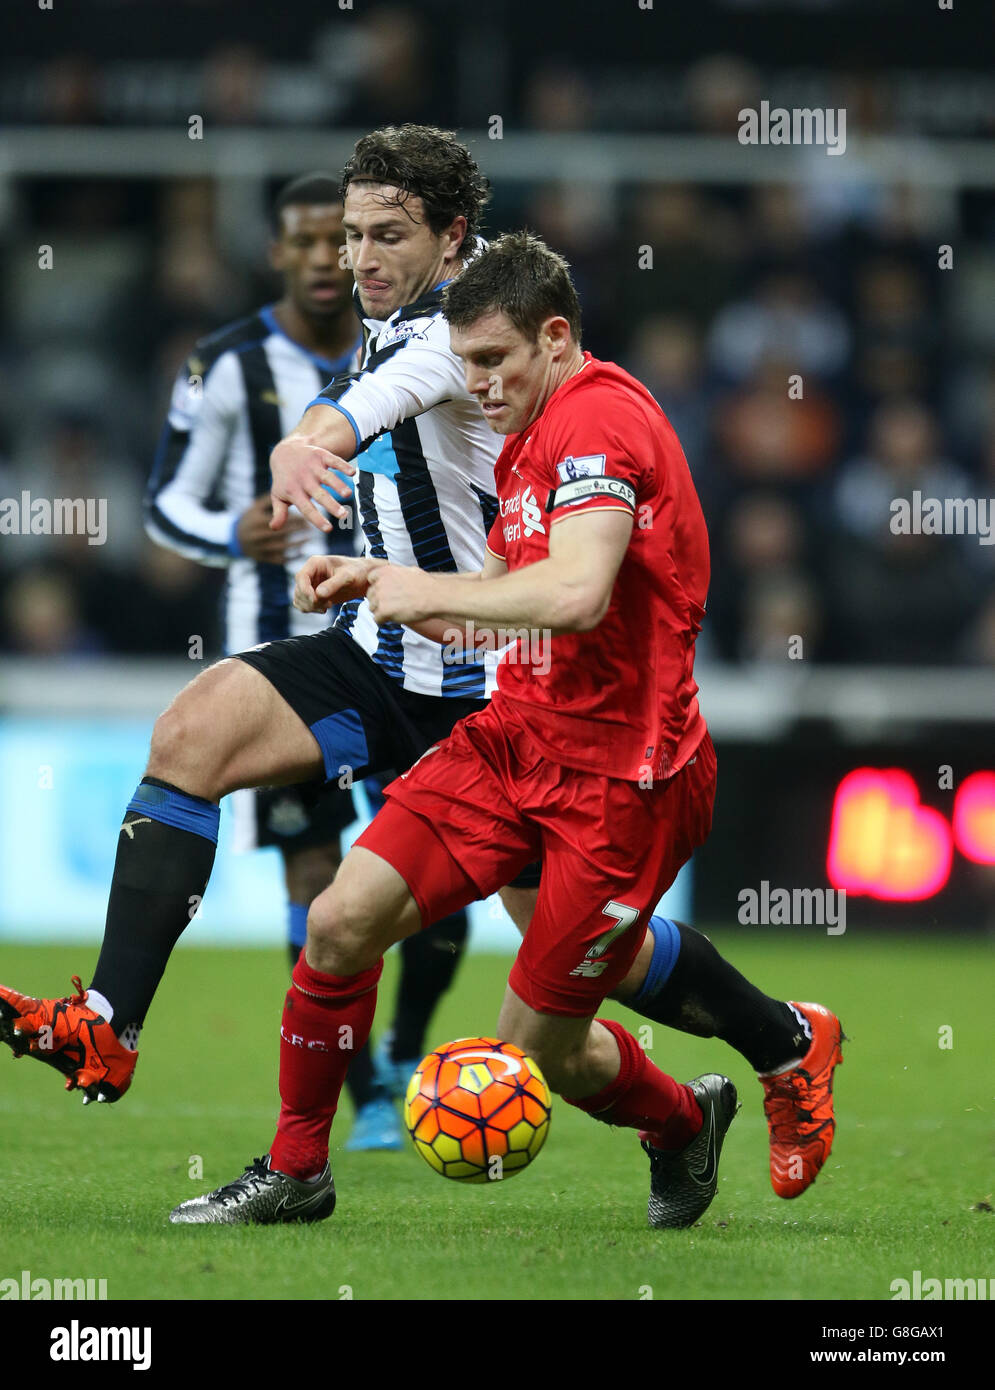 Newcastle United's Daryl Janmaat (left) tackles Liverpool's James Milner during the Barclays Premier League match at St James' Park, Newcastle. Stock Photo